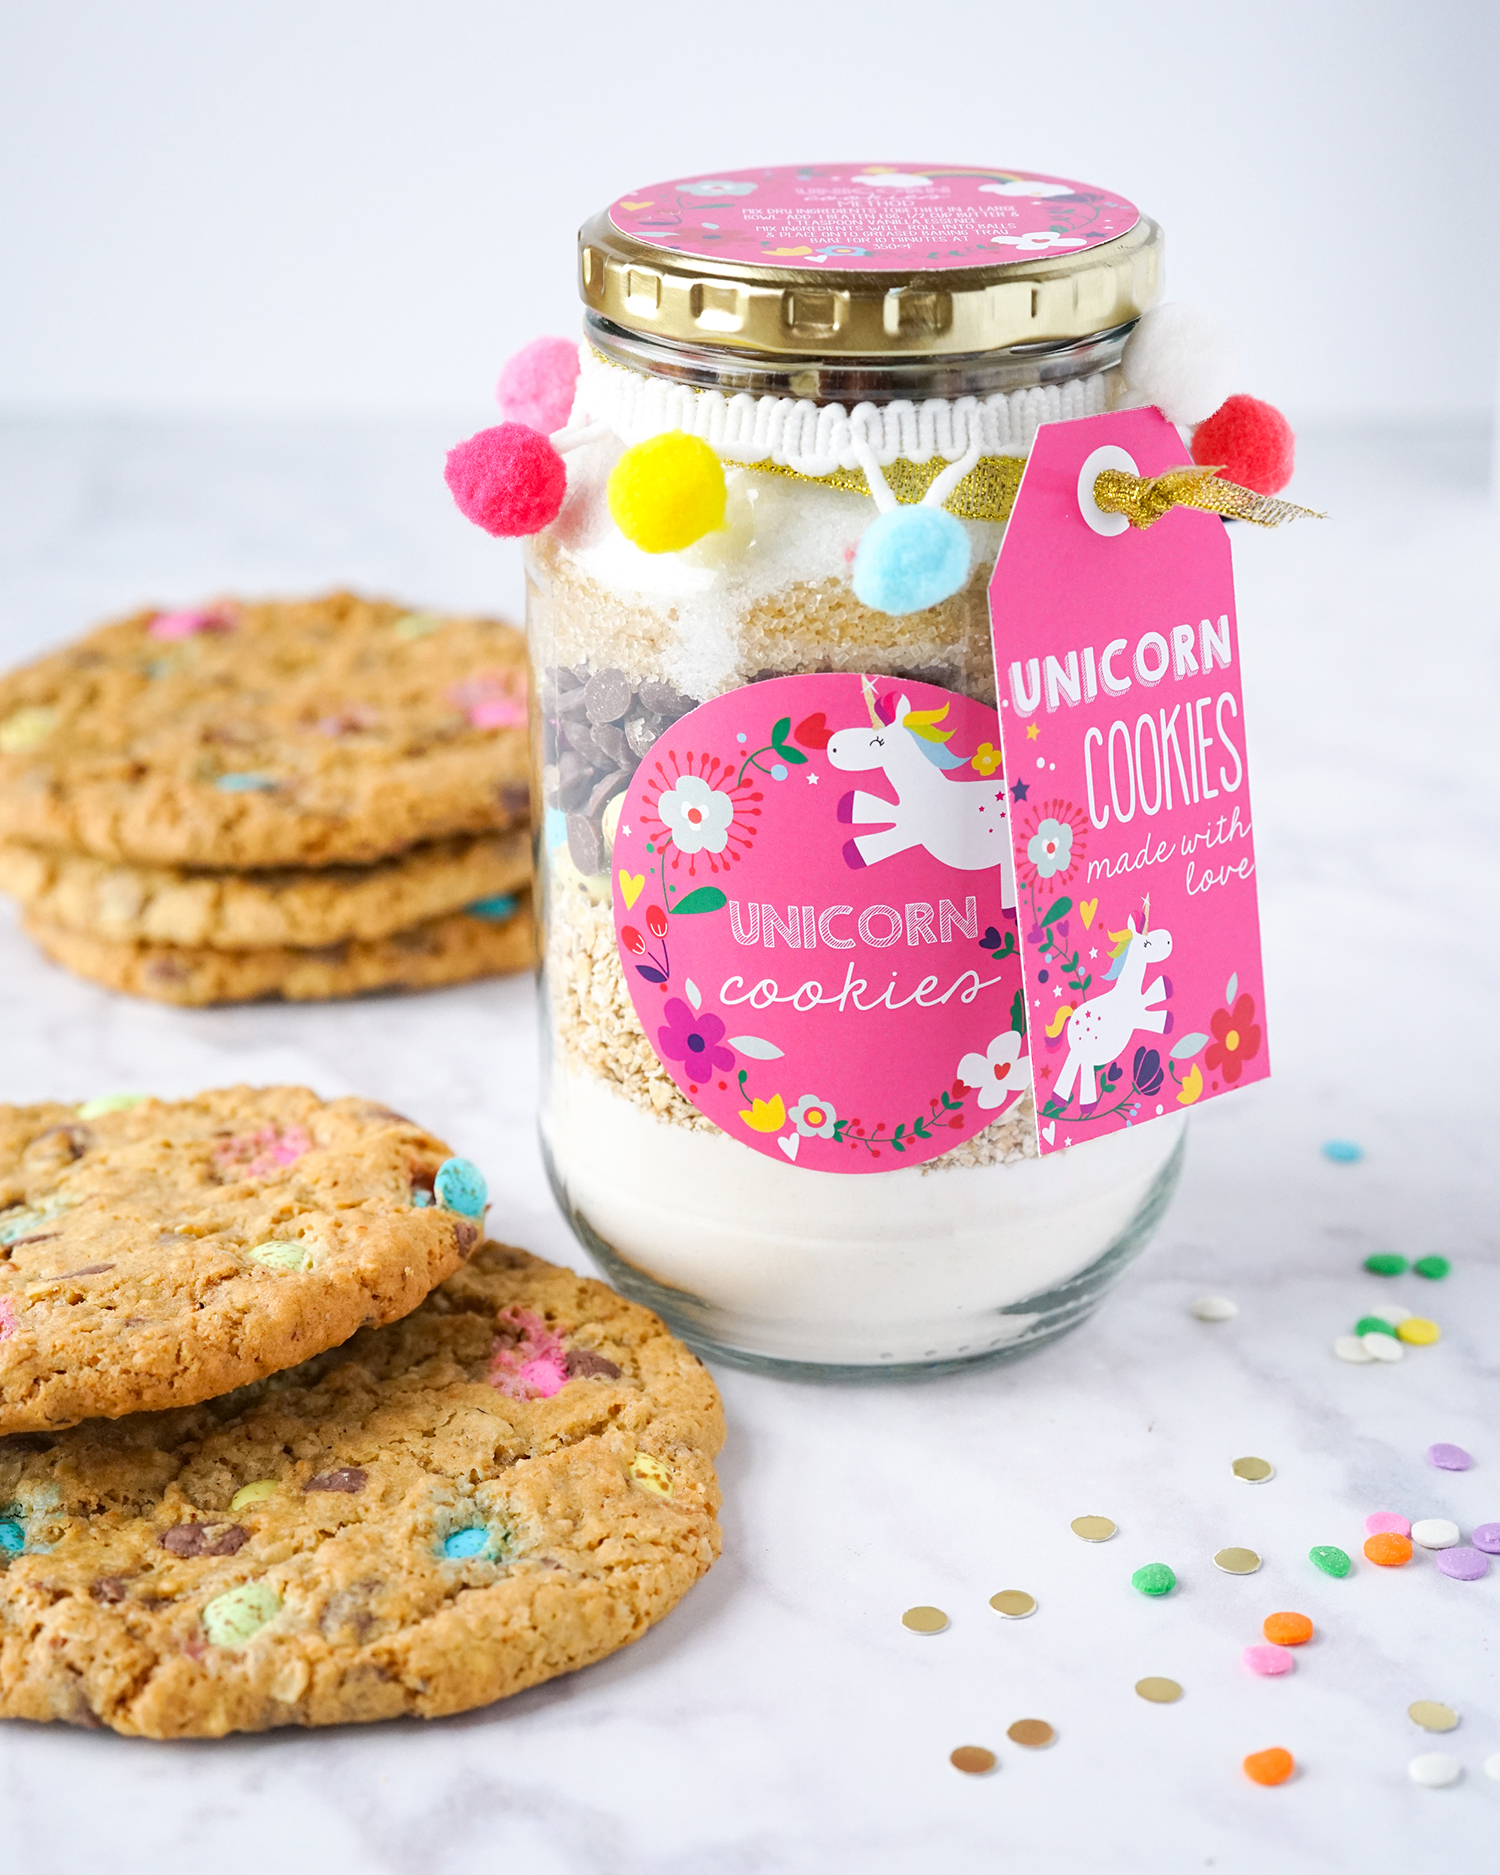 Unicorn Cookies in a Jar recipe and Labels